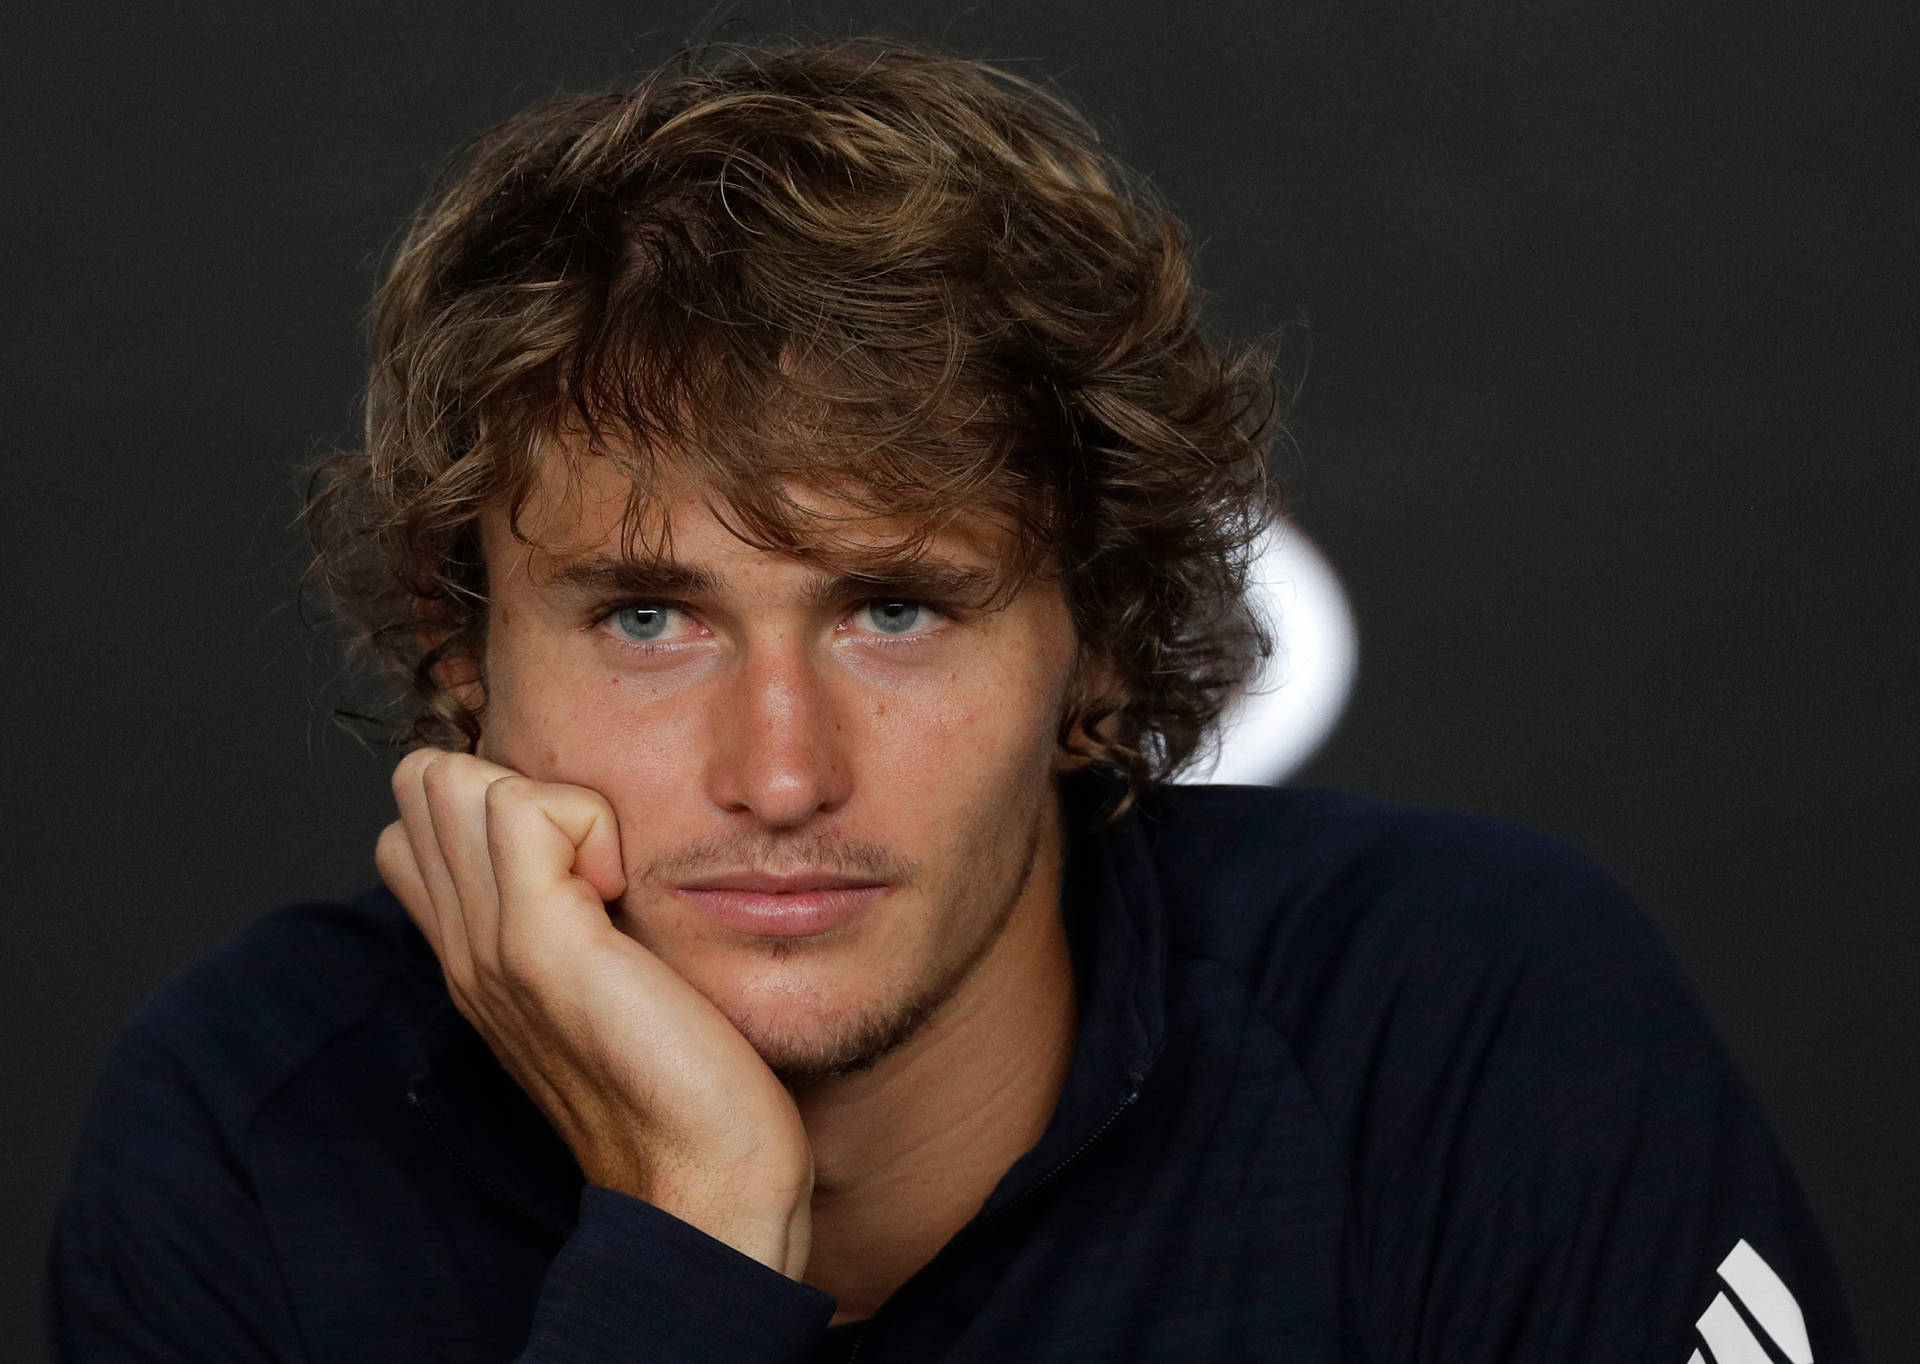 Post-Game Interview Session with Alexander Zverev Wallpaper